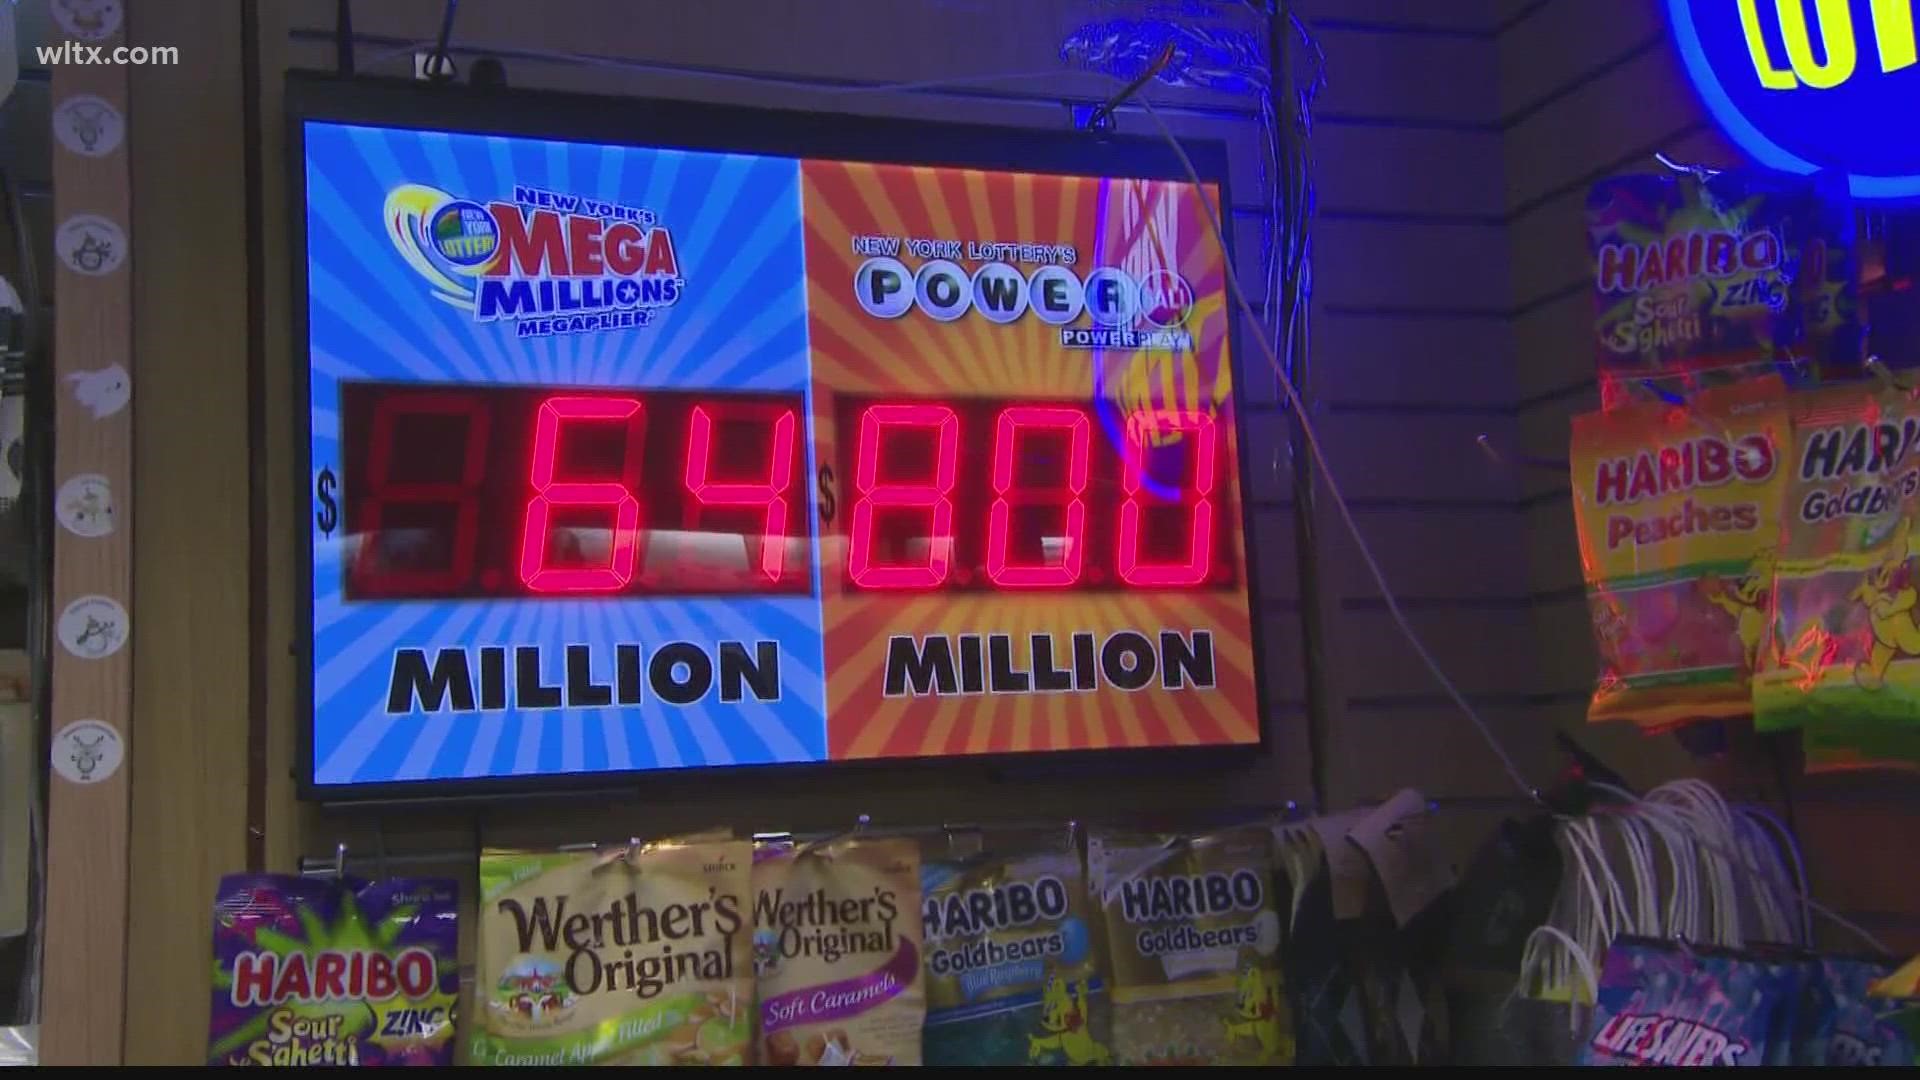 The estimated $800M prize is the 5th largest U.S. lottery jackpot of all time. You can see the drawing as it happens right before News 19 at 11.